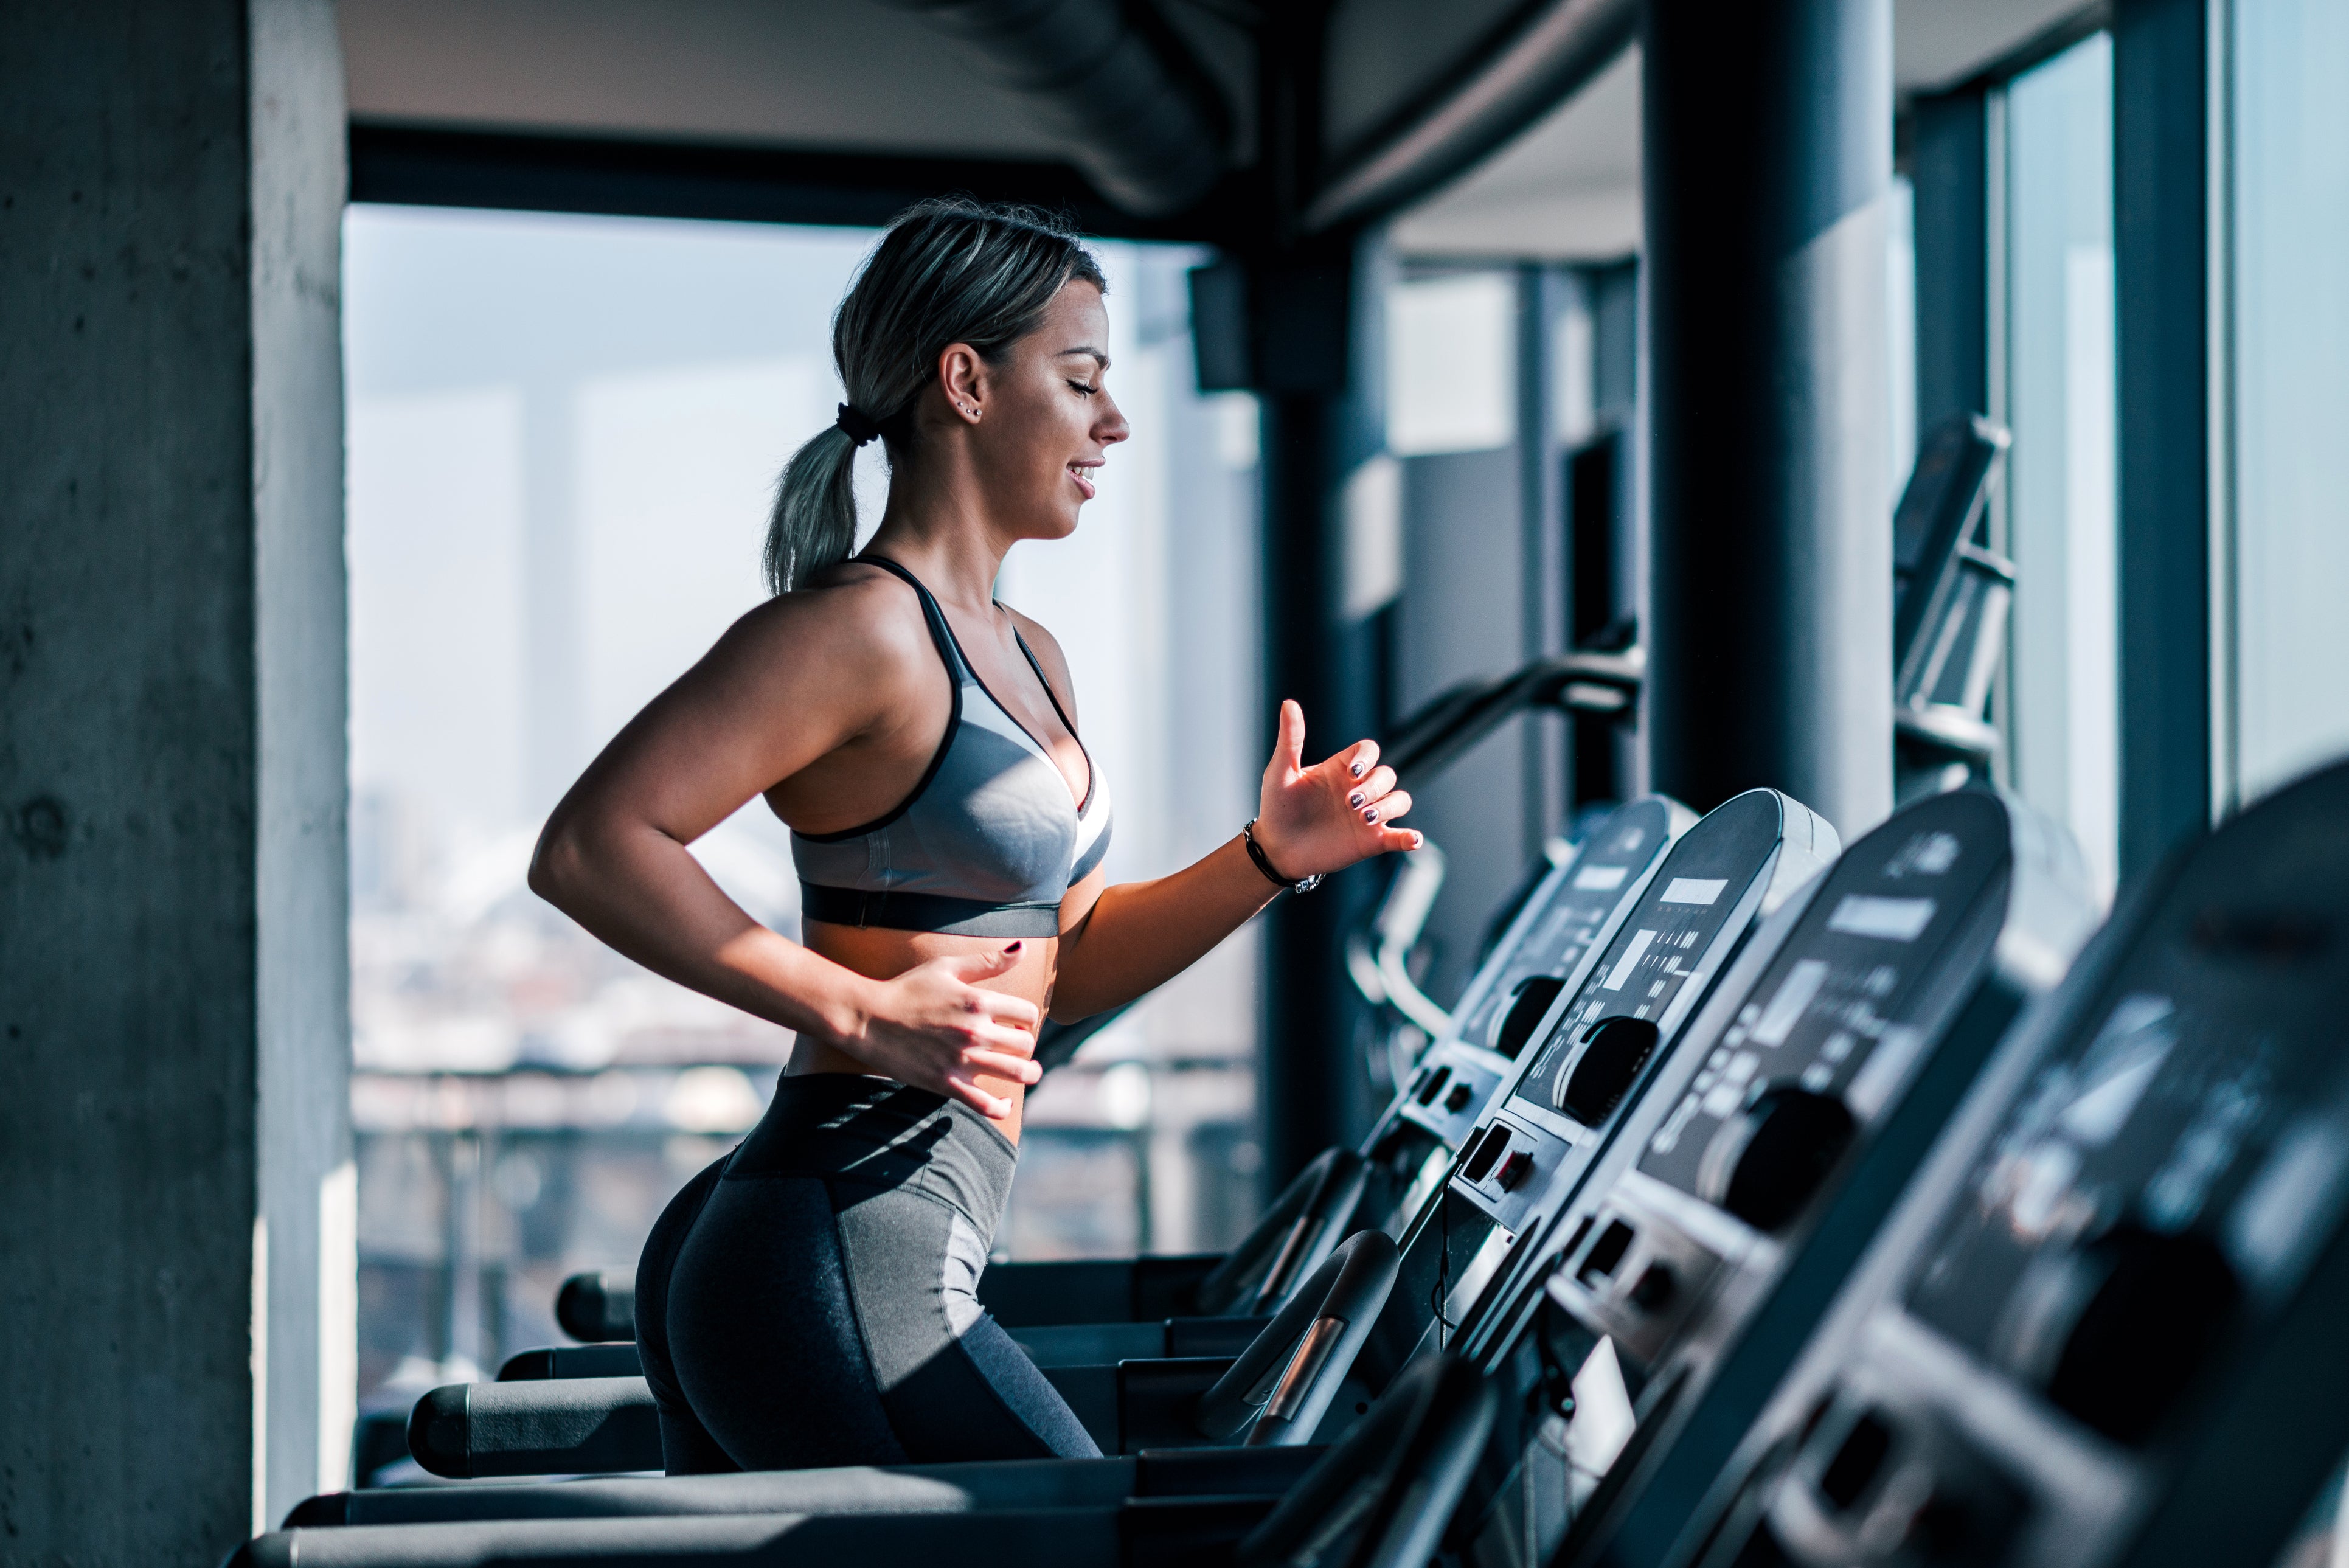 CARDIO OR STRENGTH TRAINING: WHICH IS BETTER?